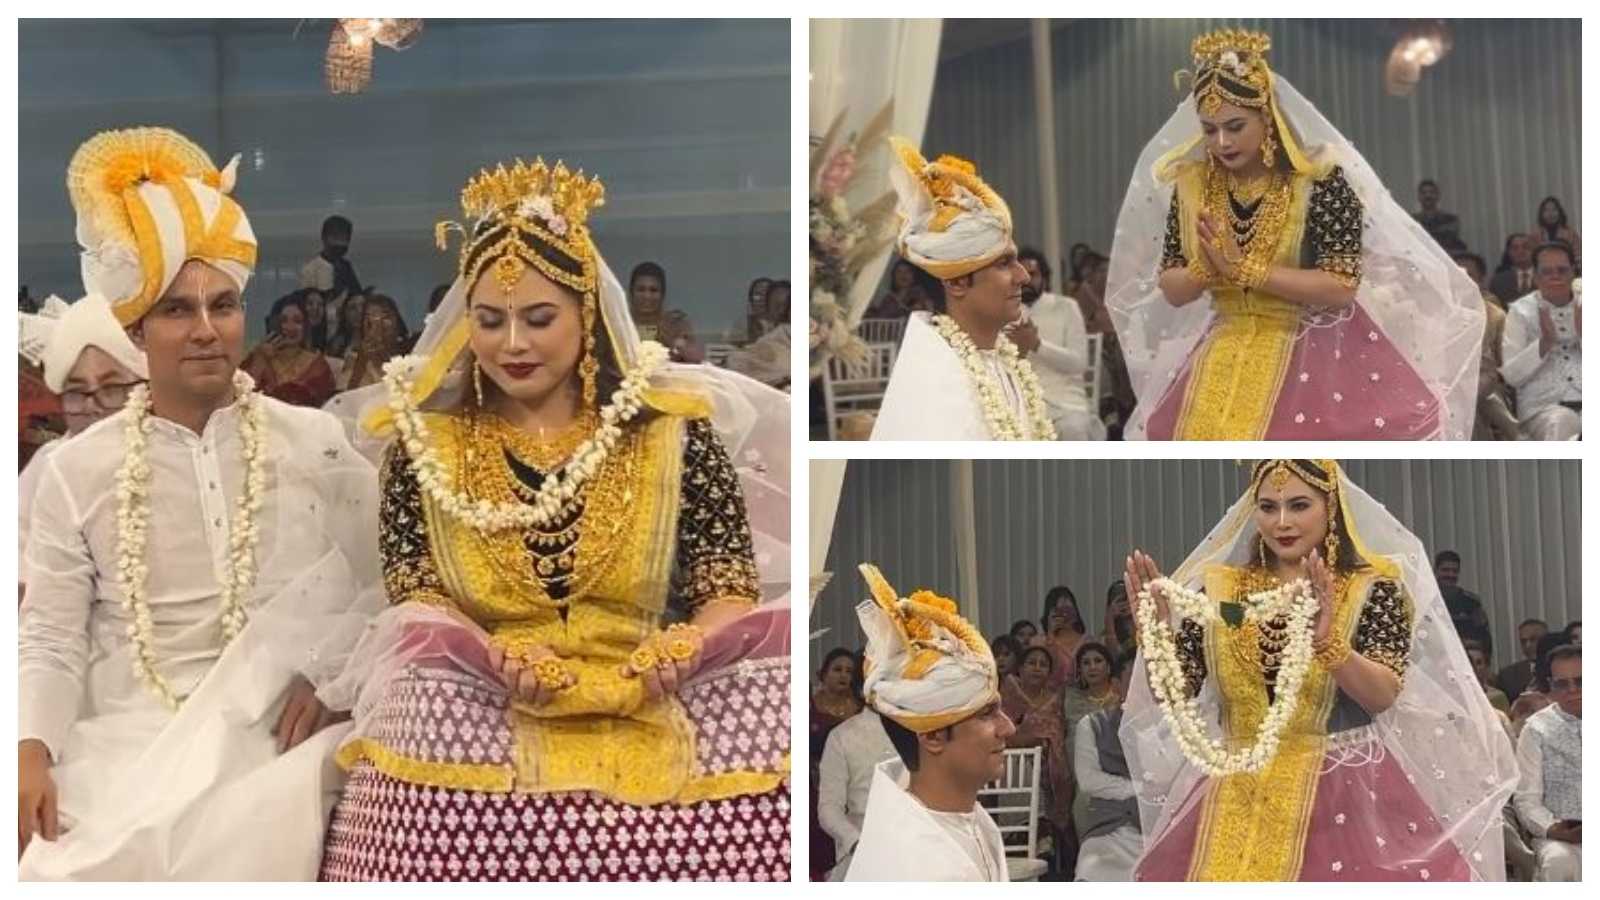 Randeep Hooda and Lin Laishram wedding: First glimpse of bride and bridegroom in traditional Manipuri ensembles is out